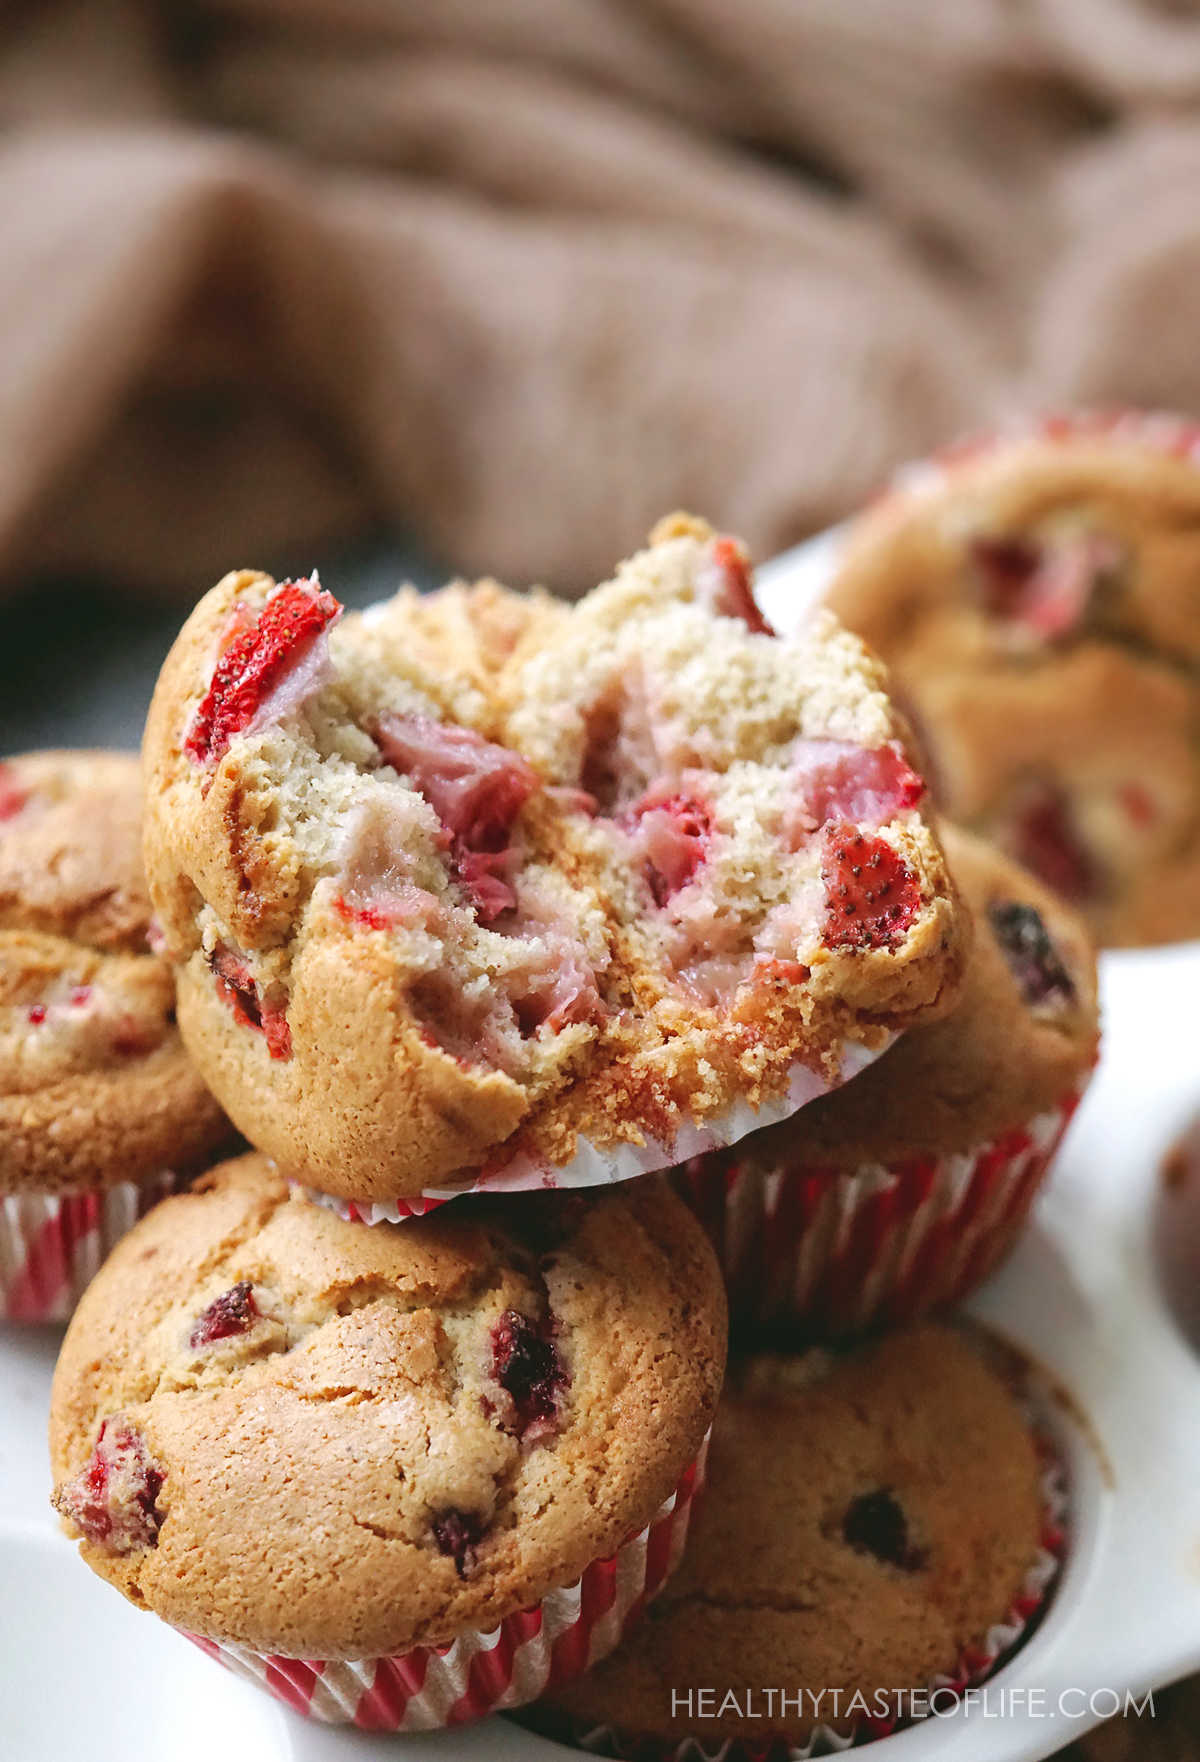 Pictures howing the inside texture of this healthy strawberry muffins - soft and fluffy gluten free dairy free strawberry muffin, 